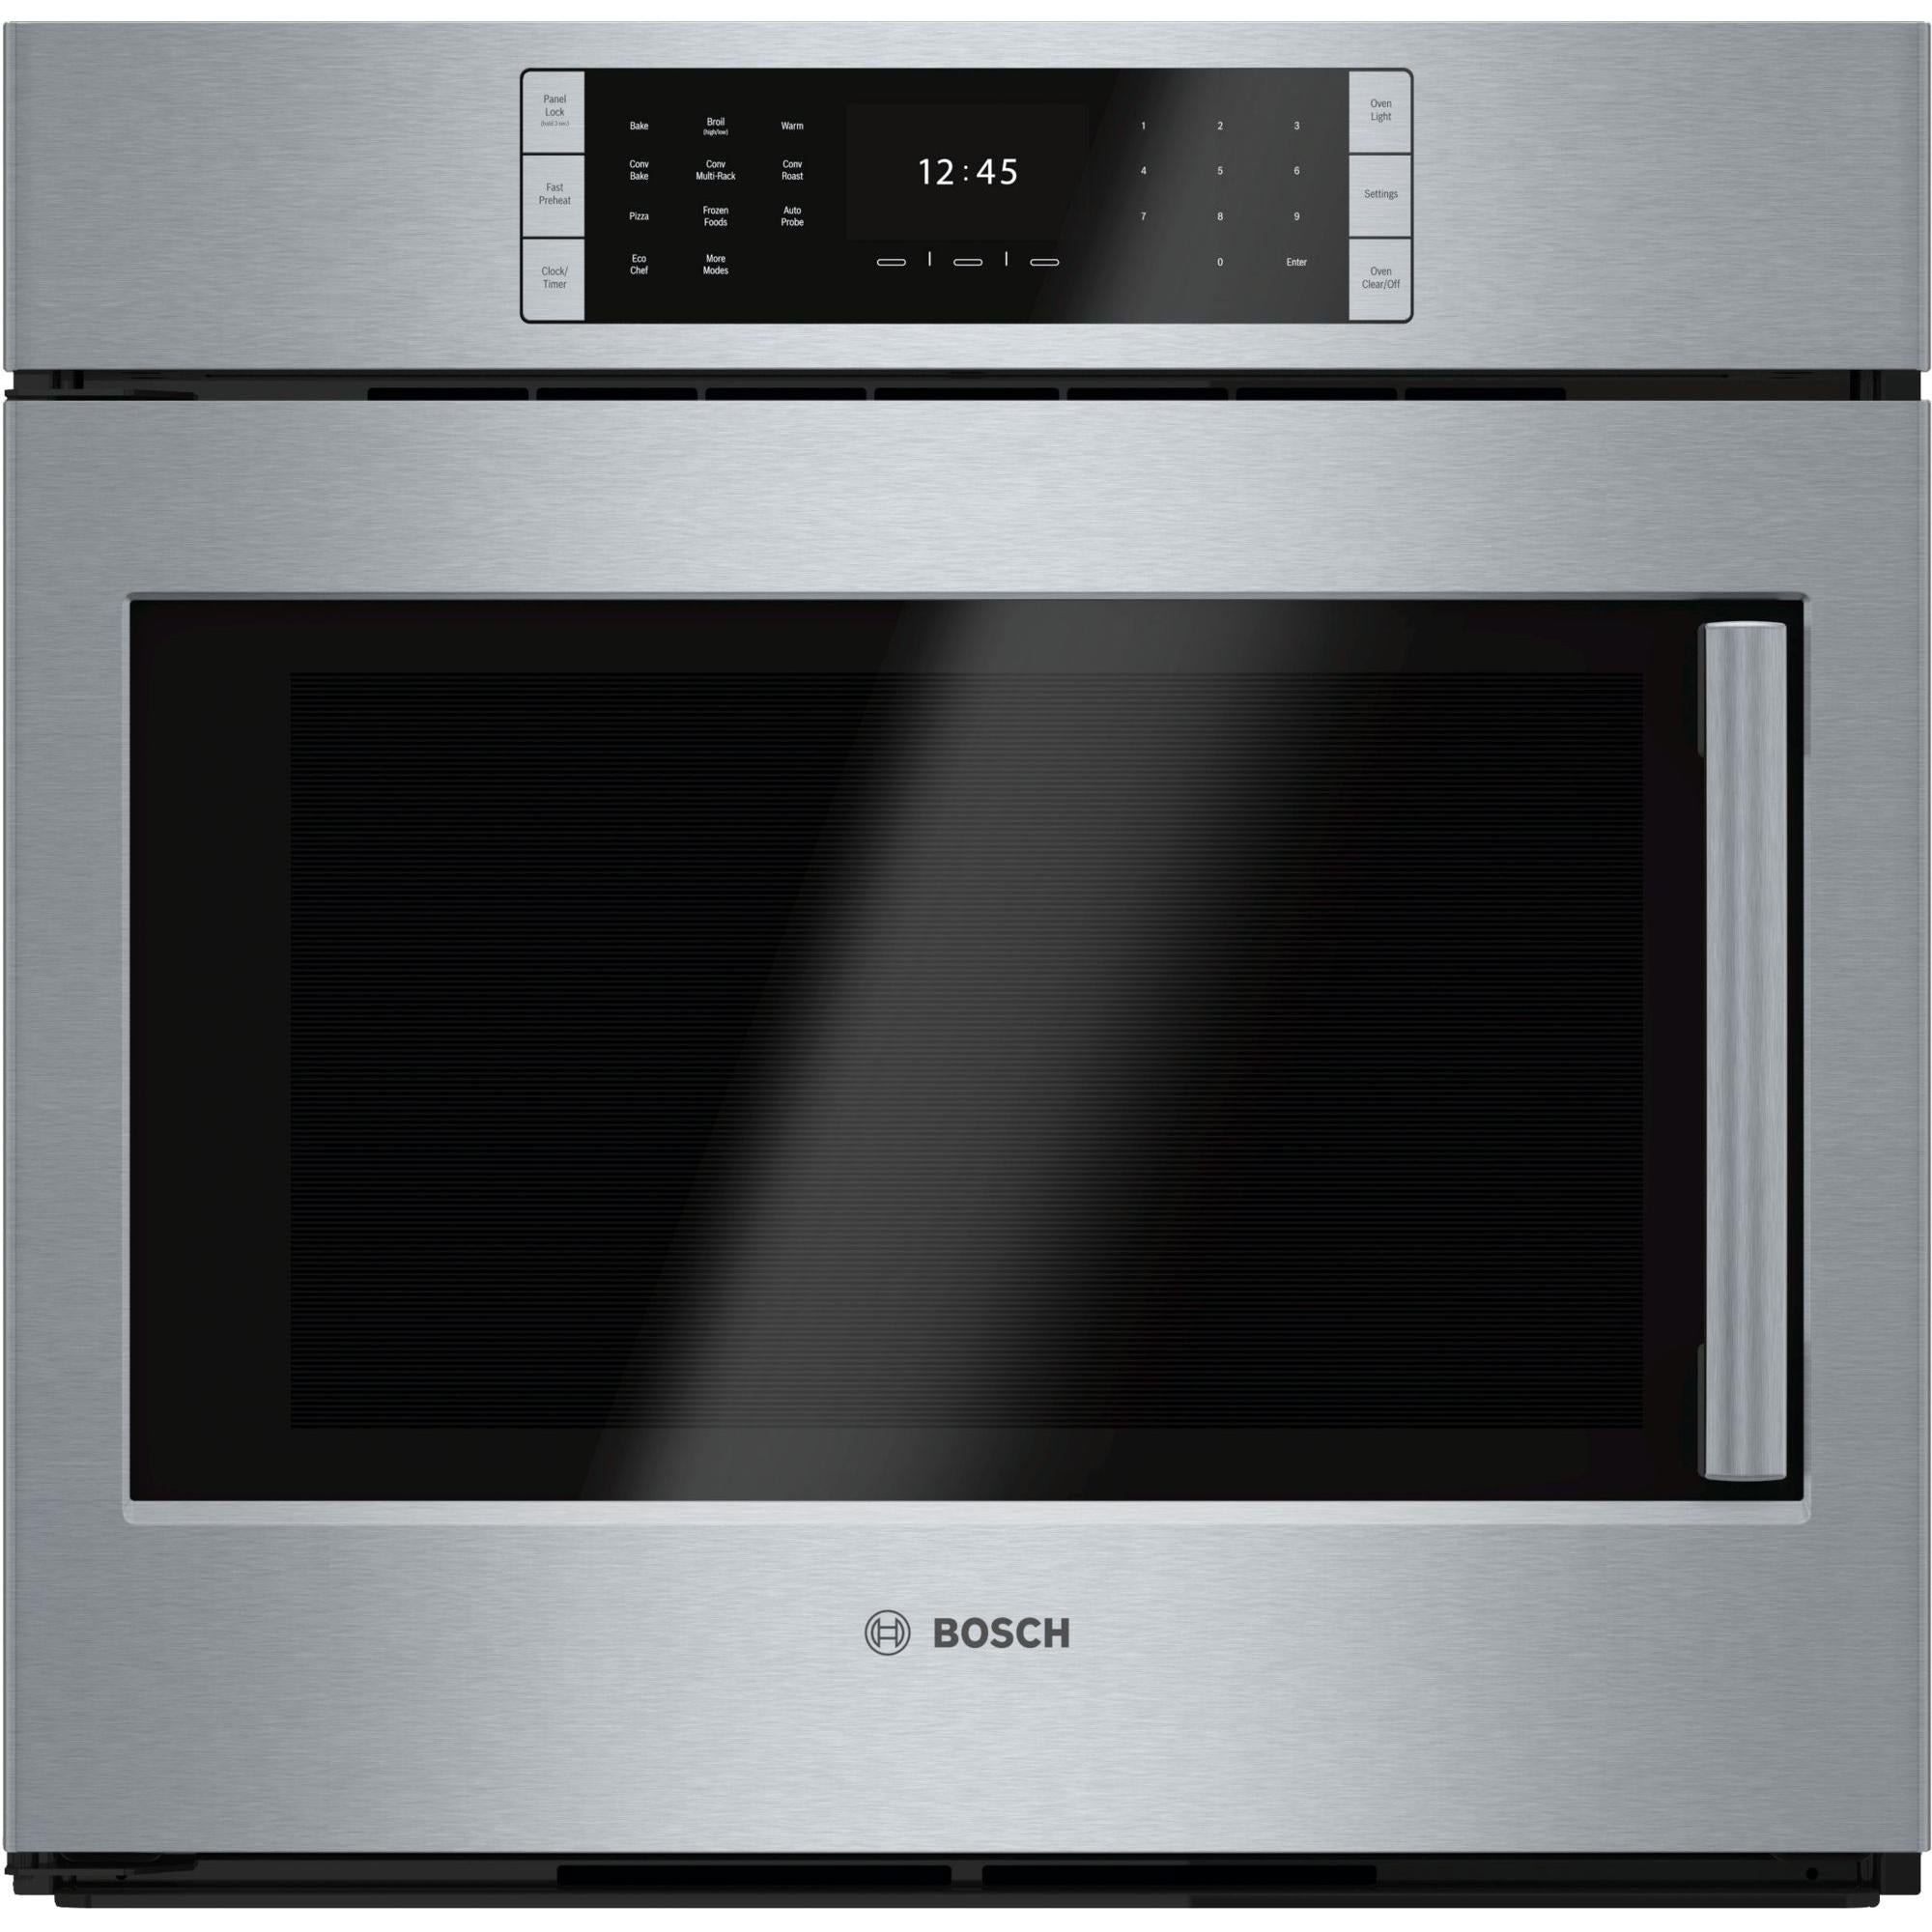 Bosch 30-inch, 4.6 cu. ft. Built-in Single Wall Oven with Convection HBLP451LUC